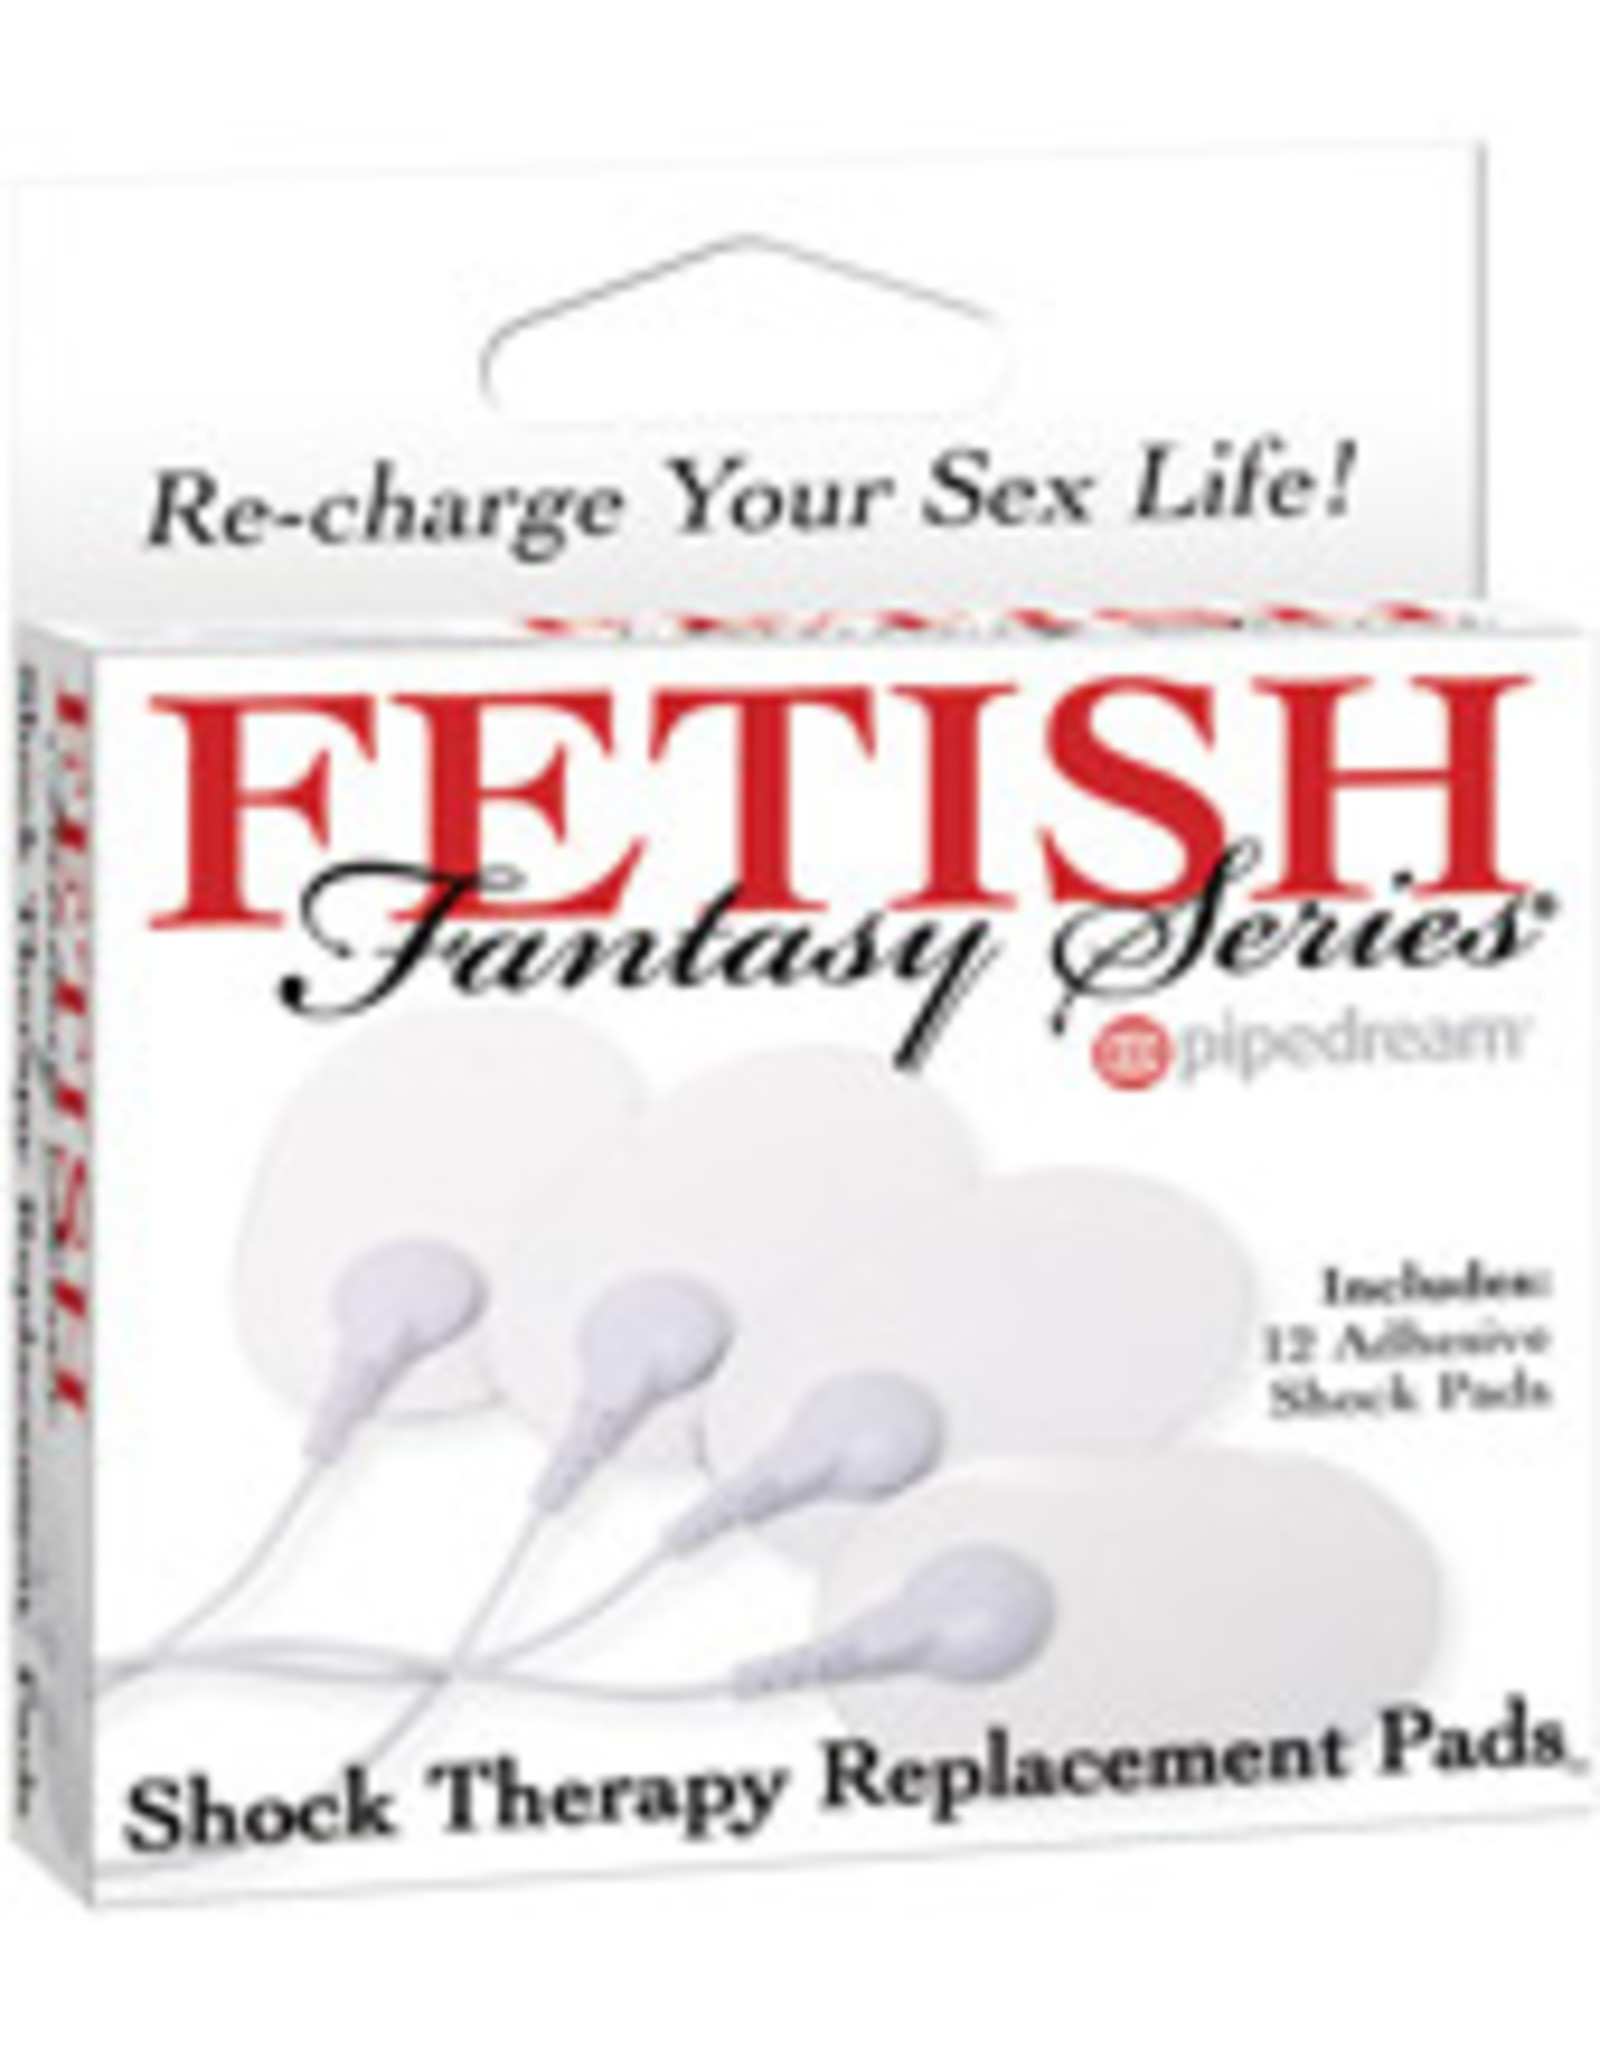 Pipedream Fetish Therapy Shock Therapy Replacement Pads 12 ct.